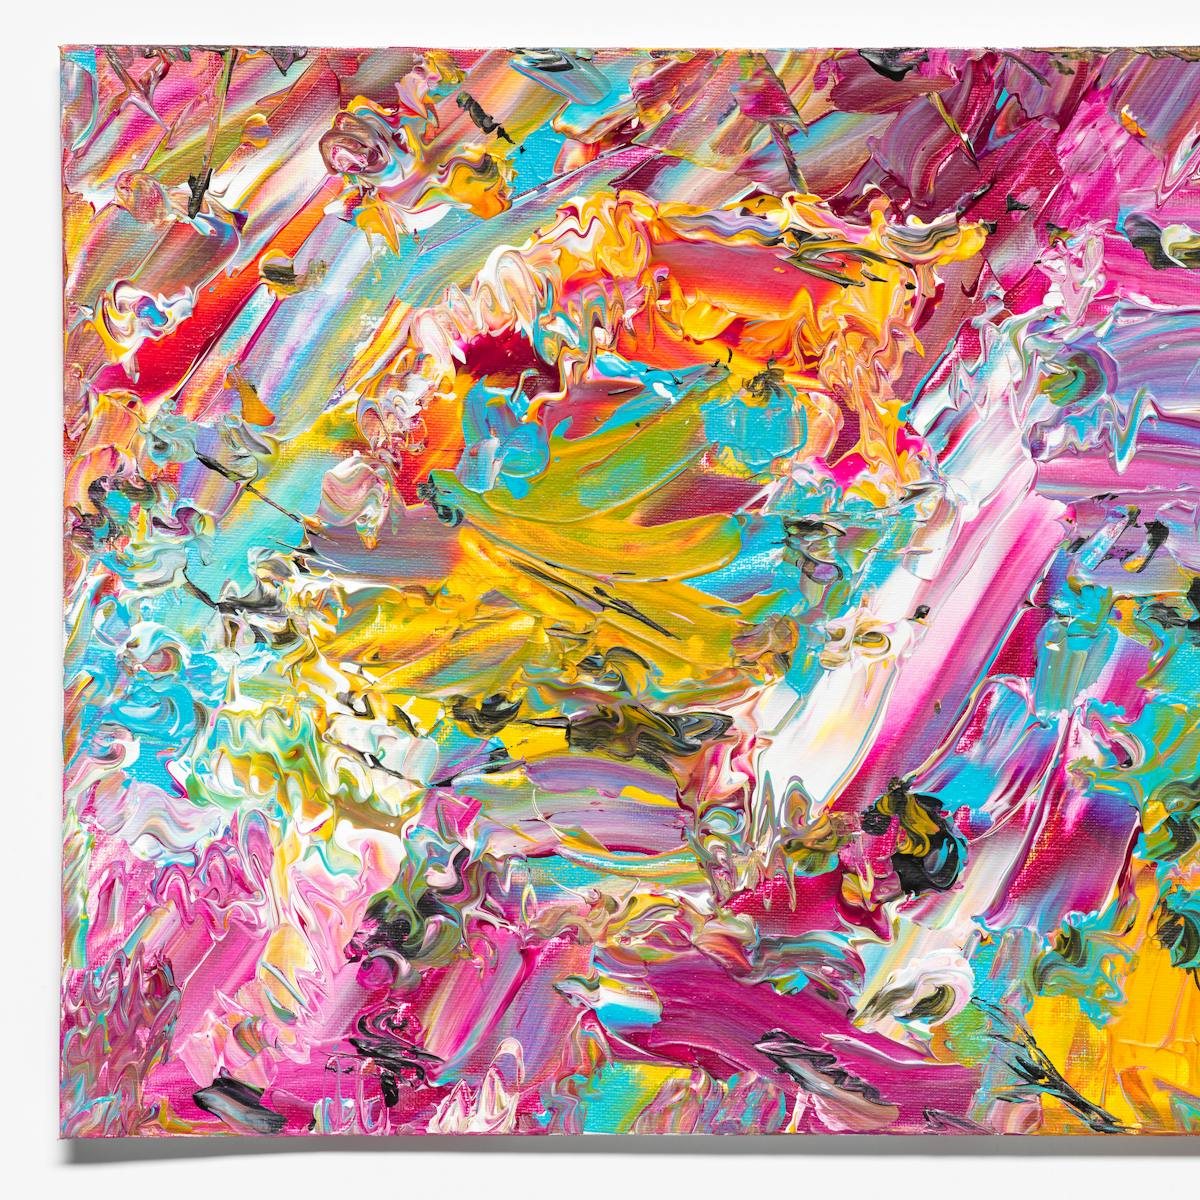 Photograph of an abstract expressionist painting  utilising acrylic paint on a rectangular canvas in landscape orientation, titled 'Obstacles'. The artwork explores themes of finding streets cluttered with obstacles as a visually impaired person.

A vast majority of the canvas surface contains many scattered, complex and confusing marks and gestures of vibrant and colourful tones - including yellow, pink, orange, turquoise, white. It's akin to a frenetic and overwhelming scene of repeated surprises and shocks.